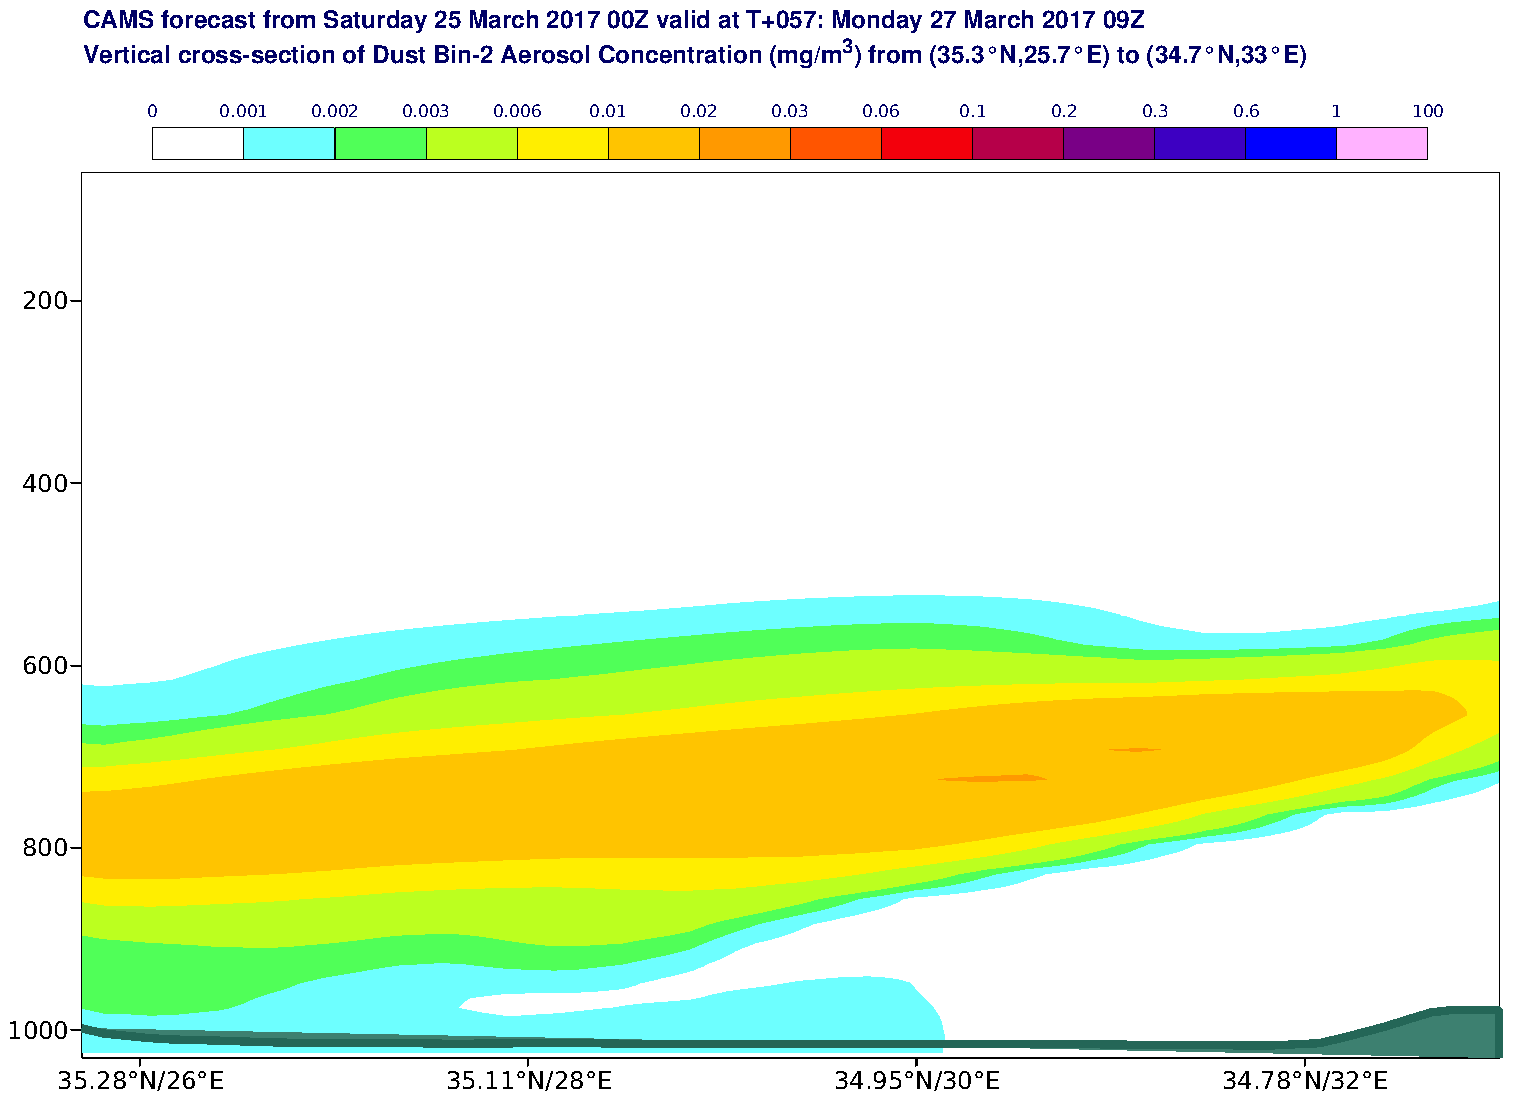 Vertical cross-section of Dust Bin-2 Aerosol Concentration (mg/m3) valid at T57 - 2017-03-27 09:00